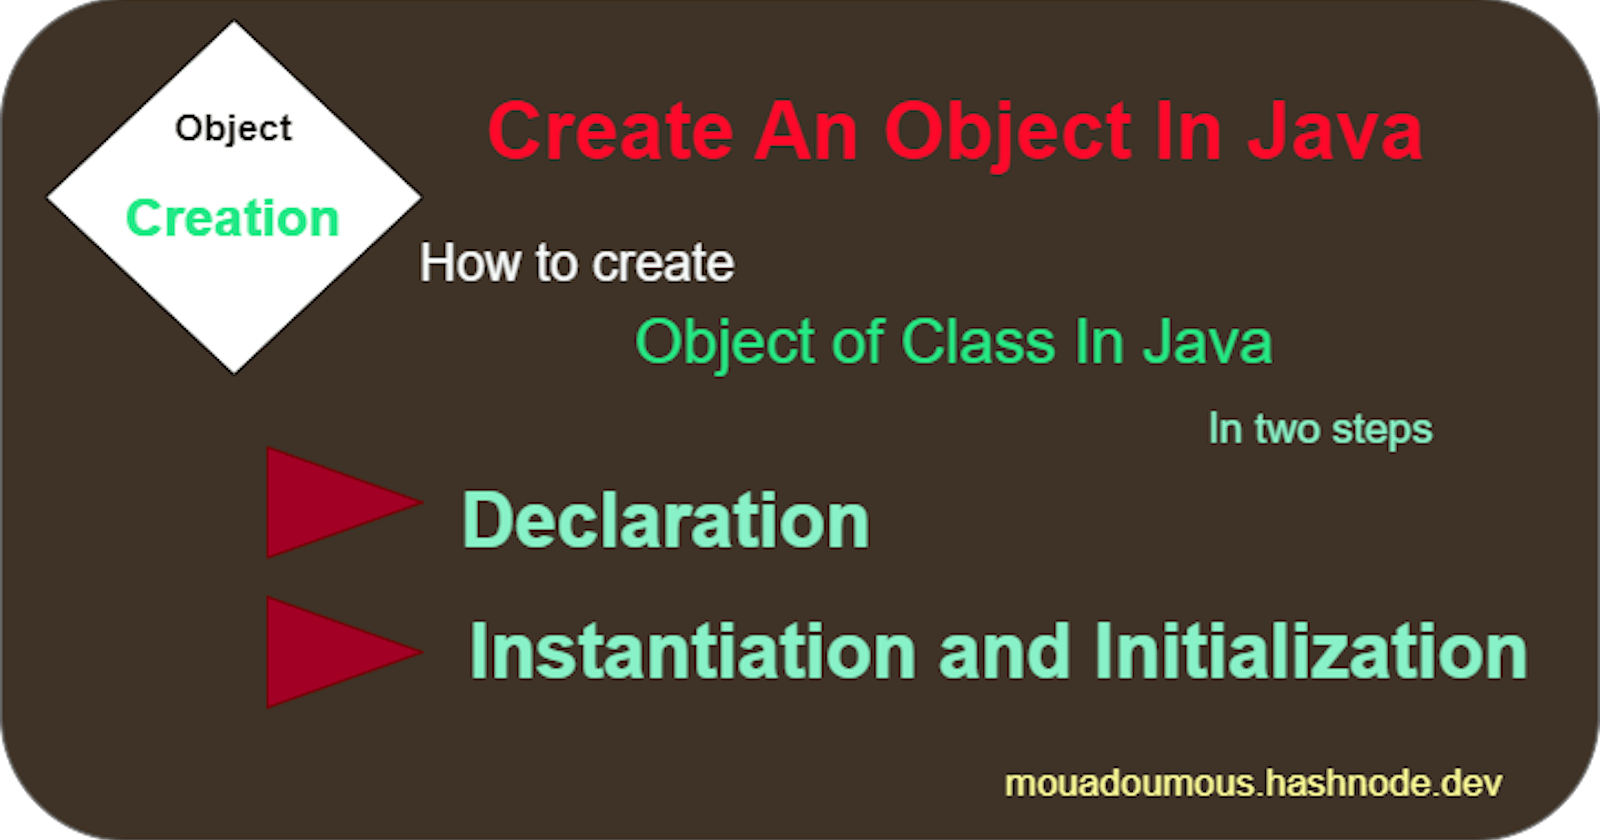 Create an Object in Java